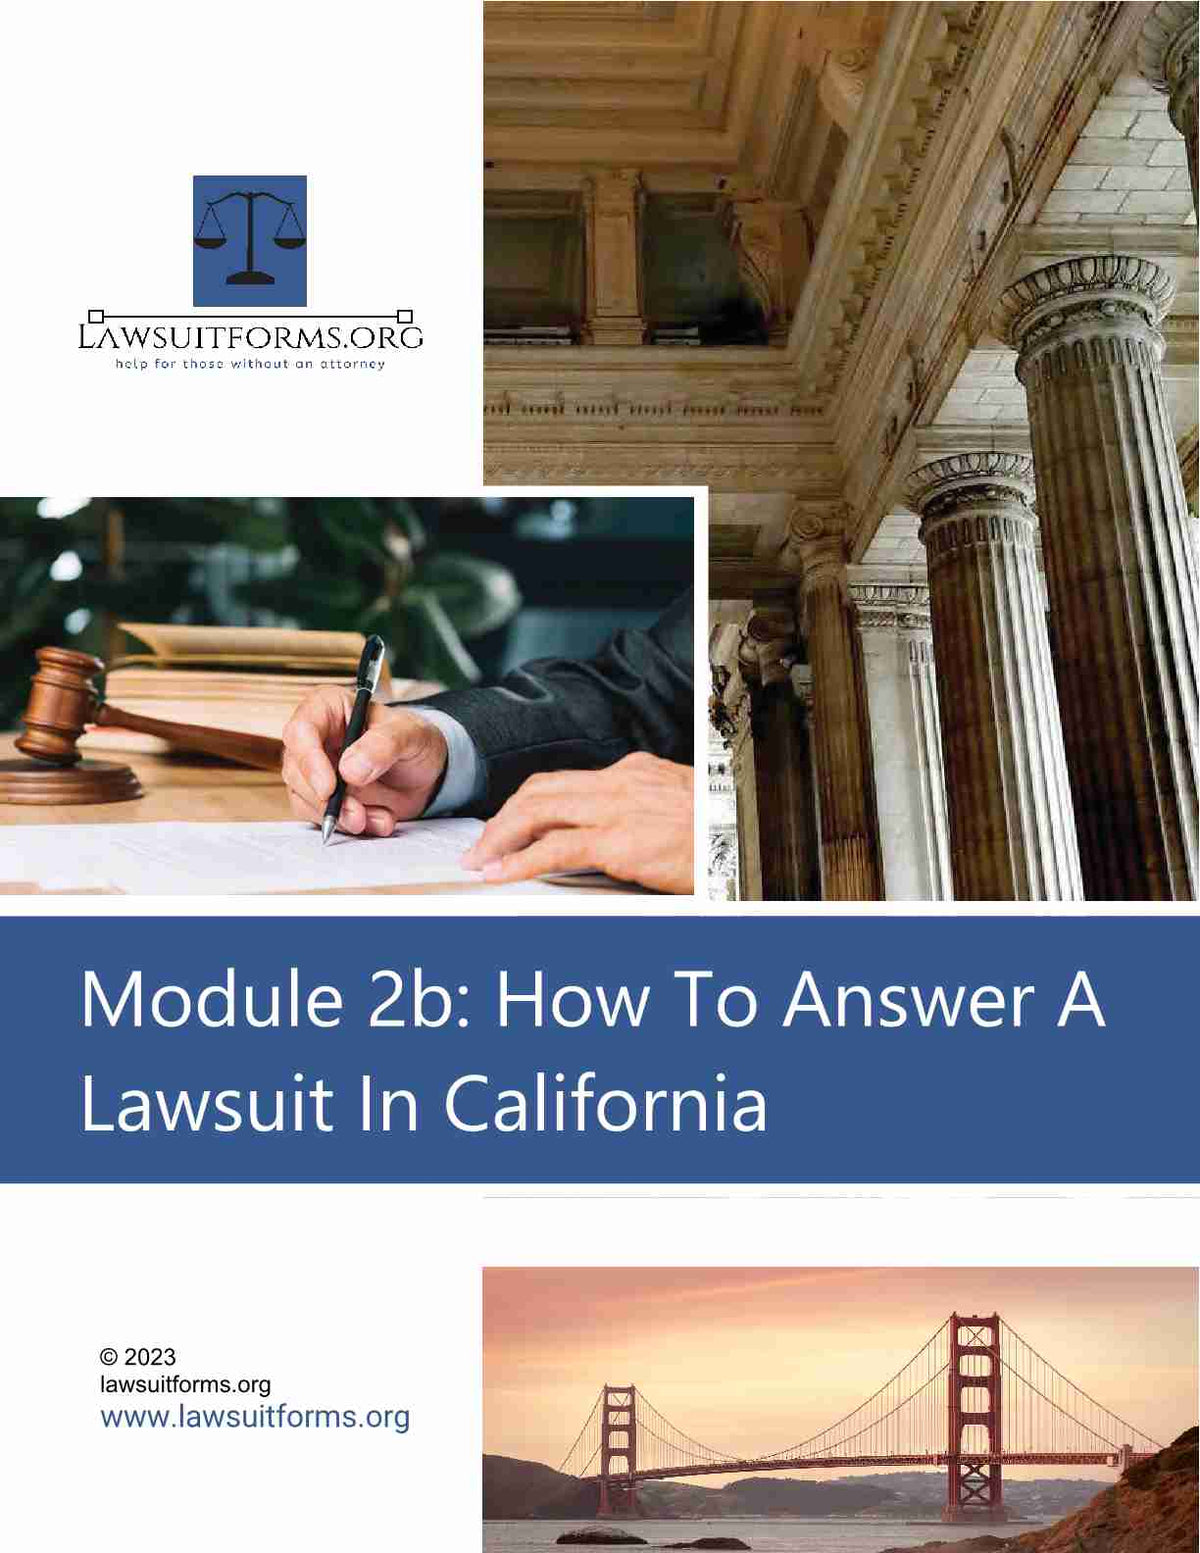 How to answer a lawsuit in California